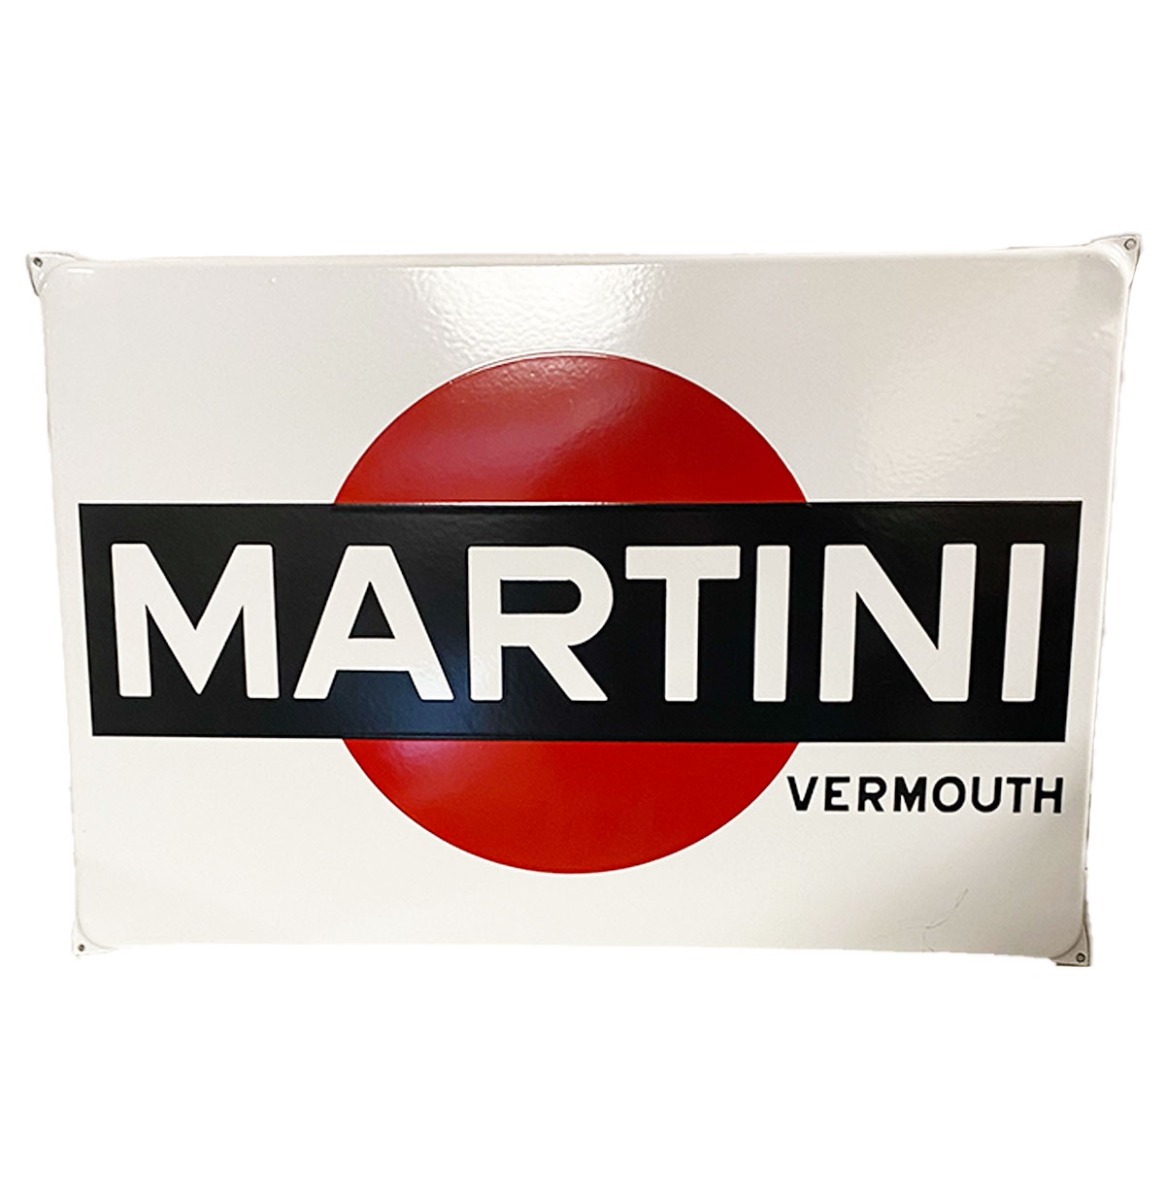 Fiftiesstore Martini Vermouth Logo Emaille Bord - 60 x 40cm